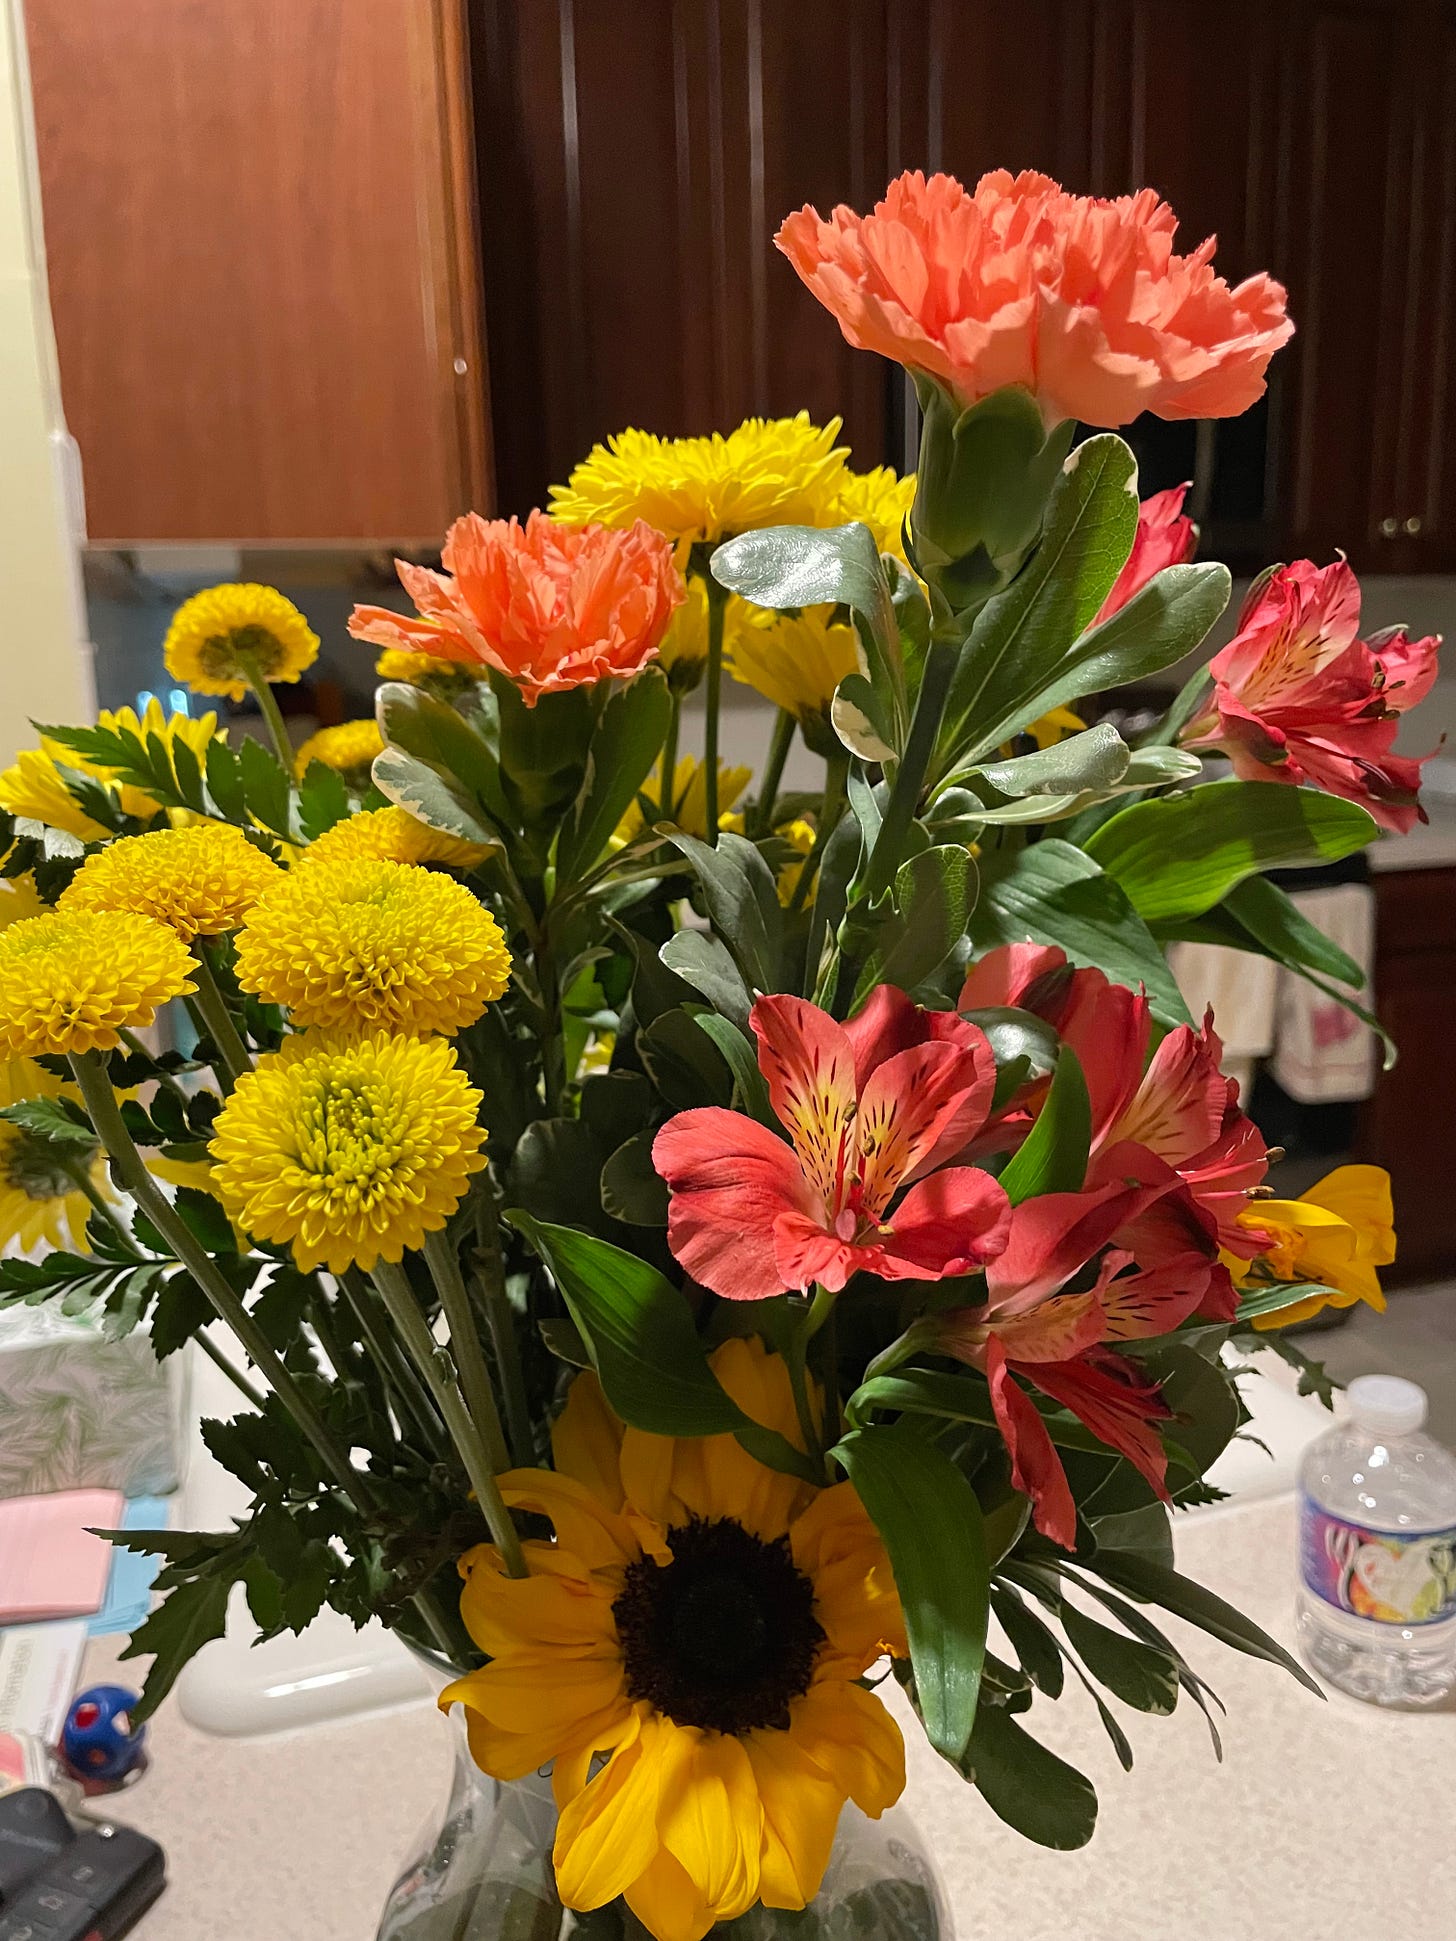 A bouquet of yellow and orange-red flowers in a vase, placed on a kitchen counter.